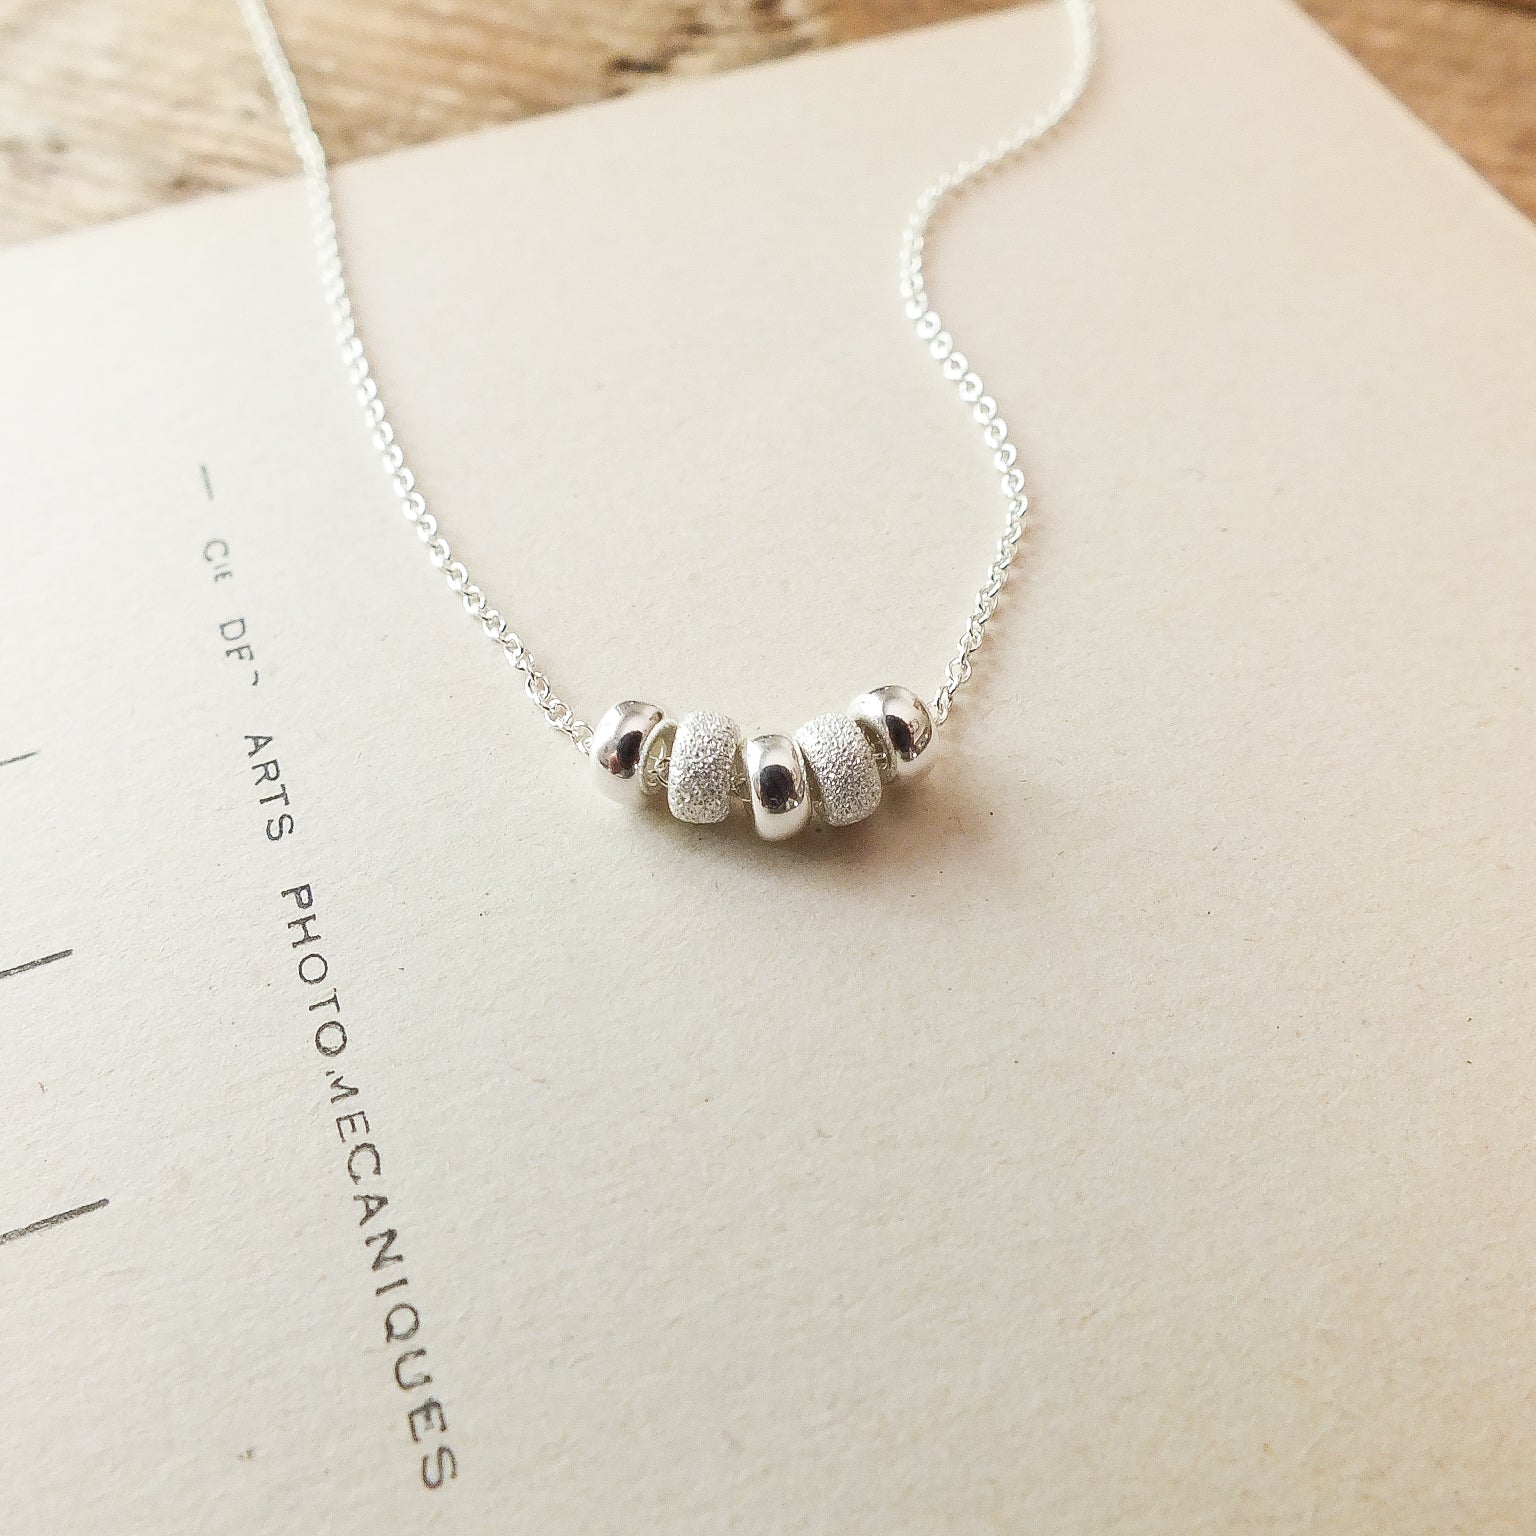 Becoming Jewelry's My Wish For You Necklace, a sterling silver comfort charm necklace with three beads, is featured on a wooden surface against a paper background.